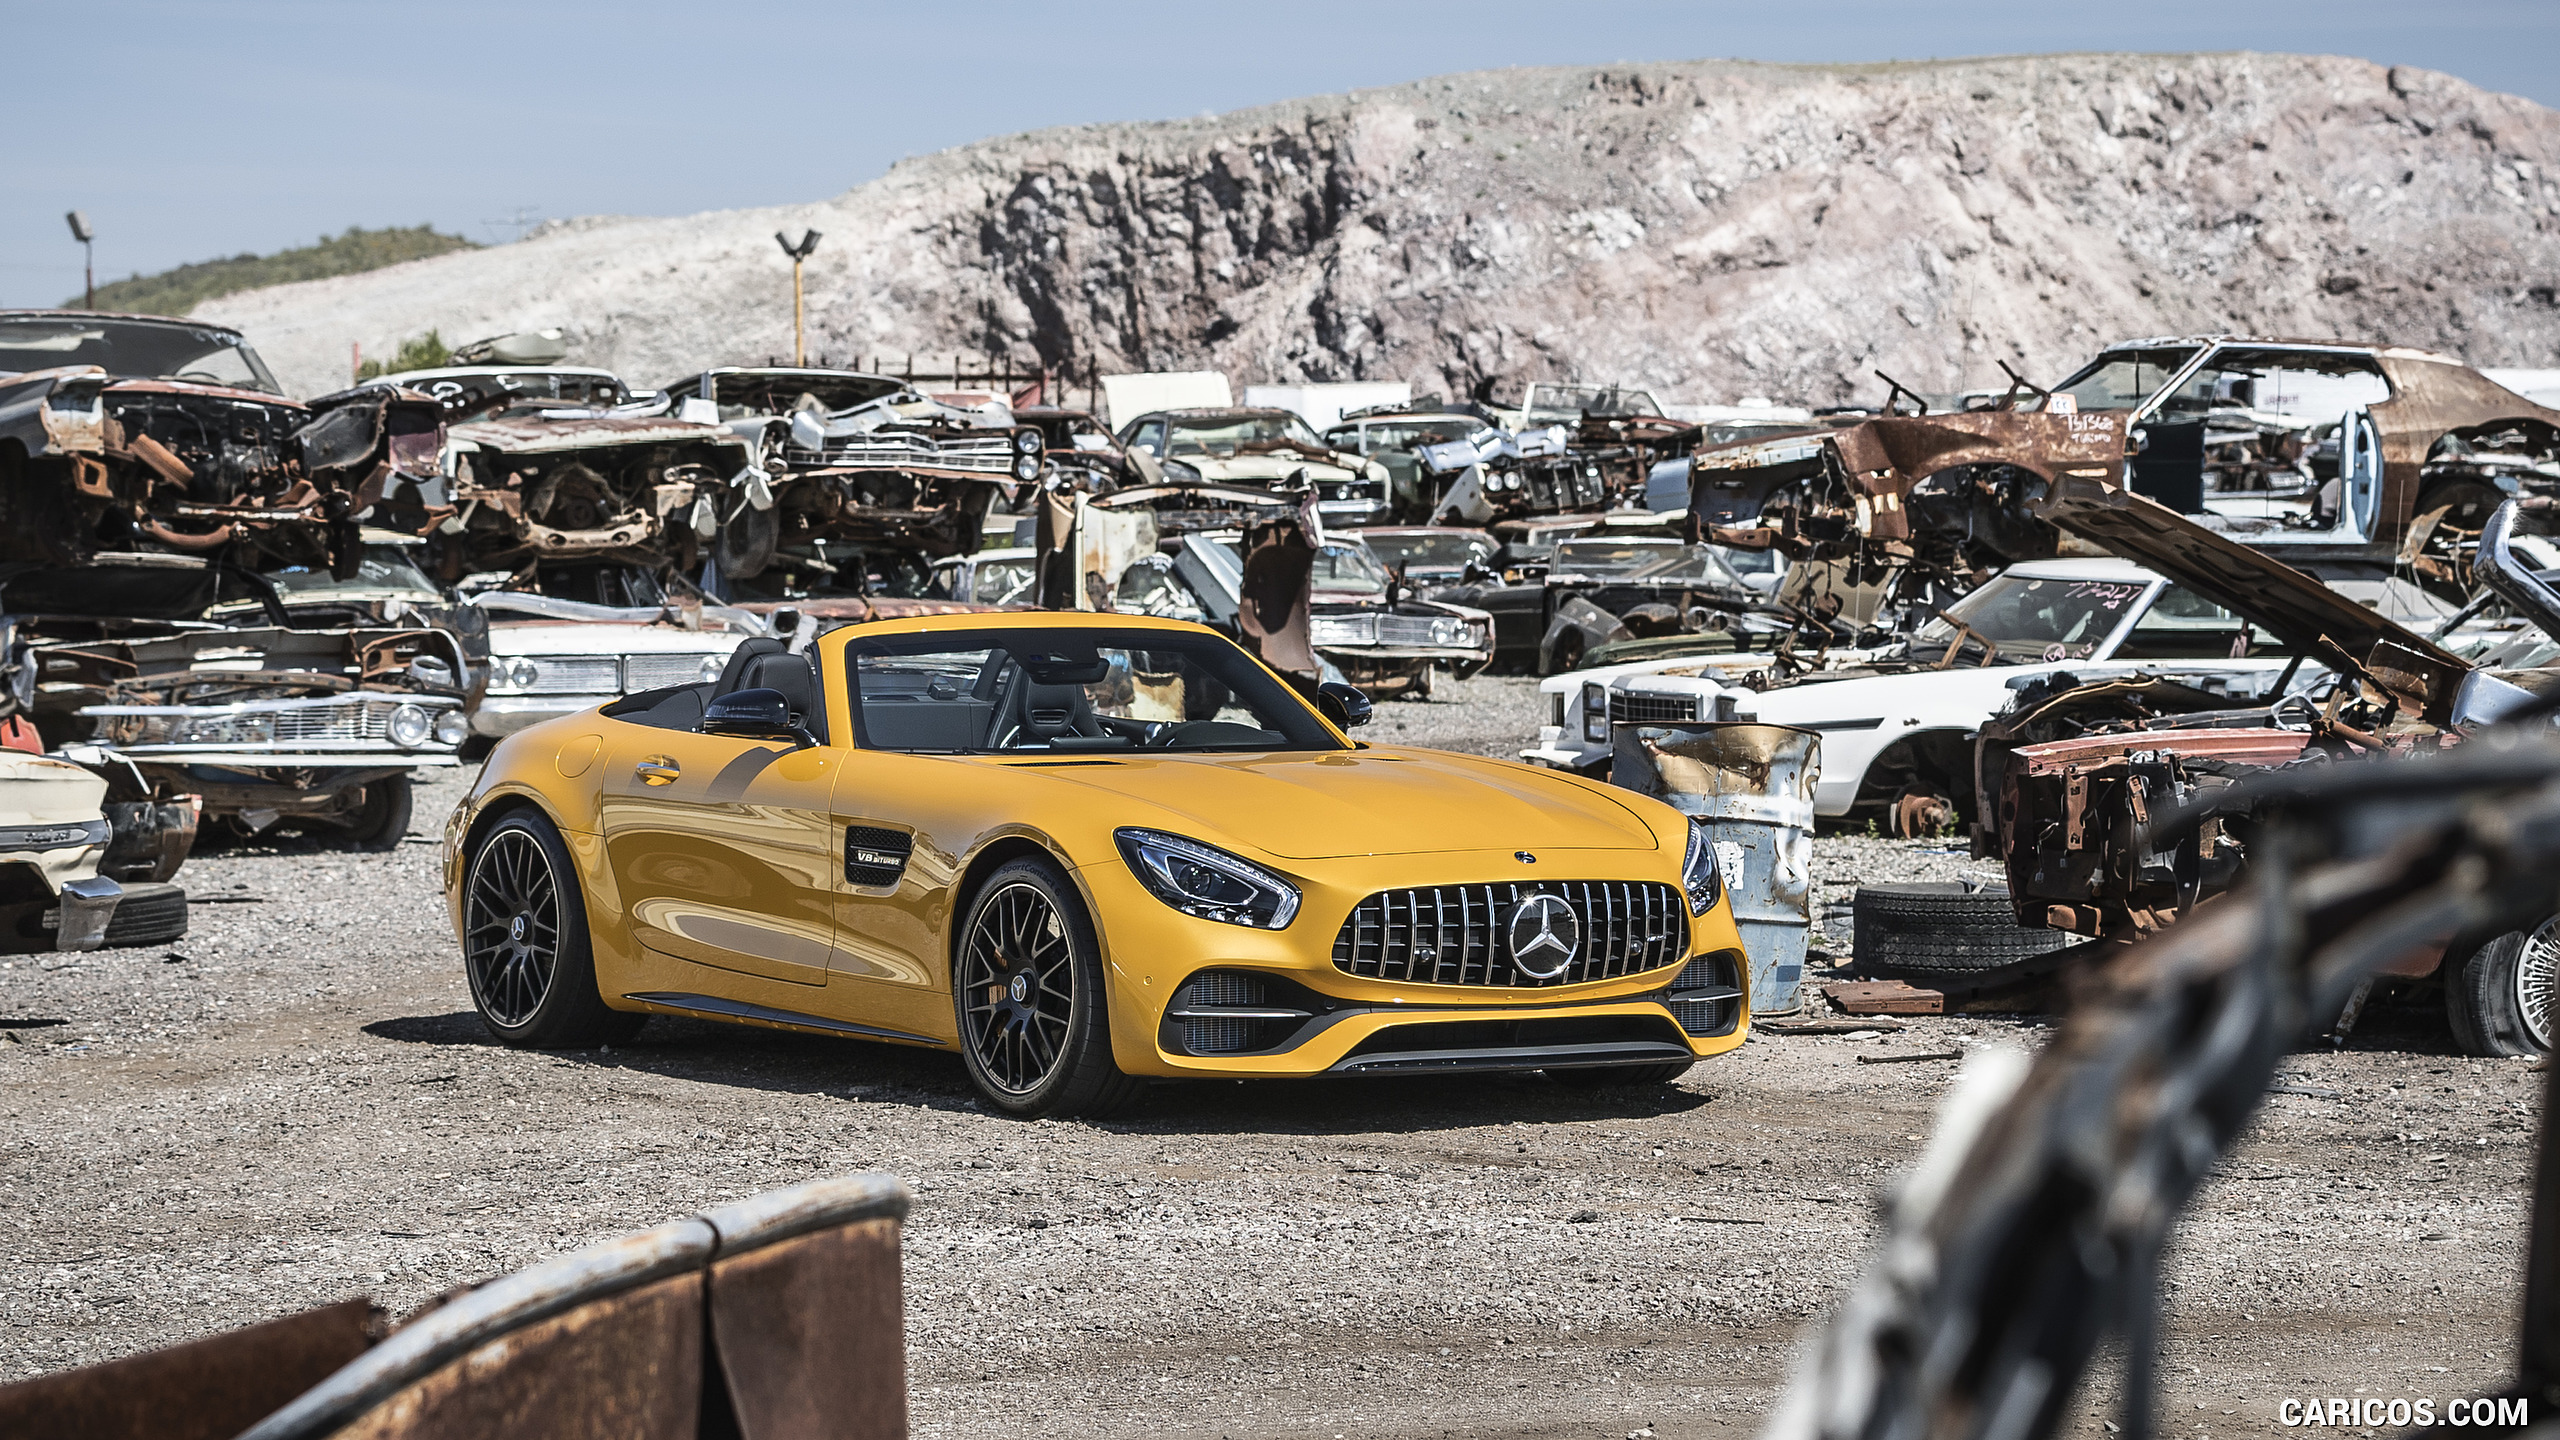 2018 Mercedes-AMG GT C Roadster - Front Three-Quarter, #209 of 350